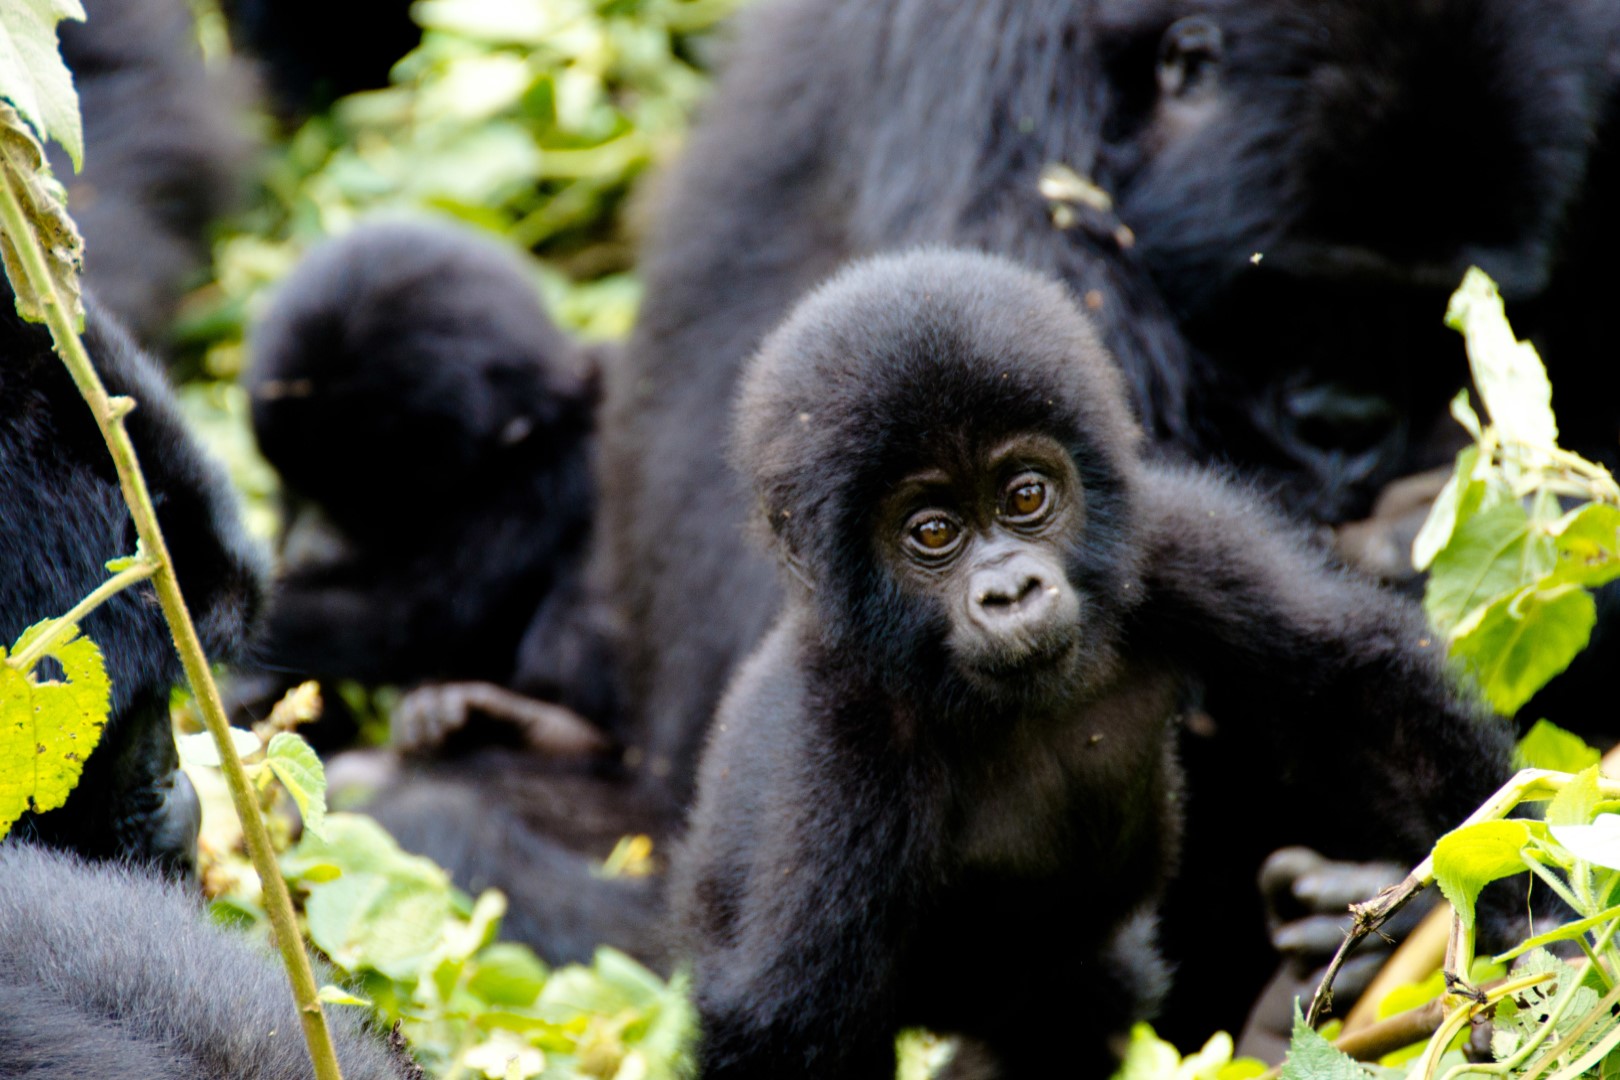 An encounter with a family mountain gorillas in Bwindi Impenetrable Forest